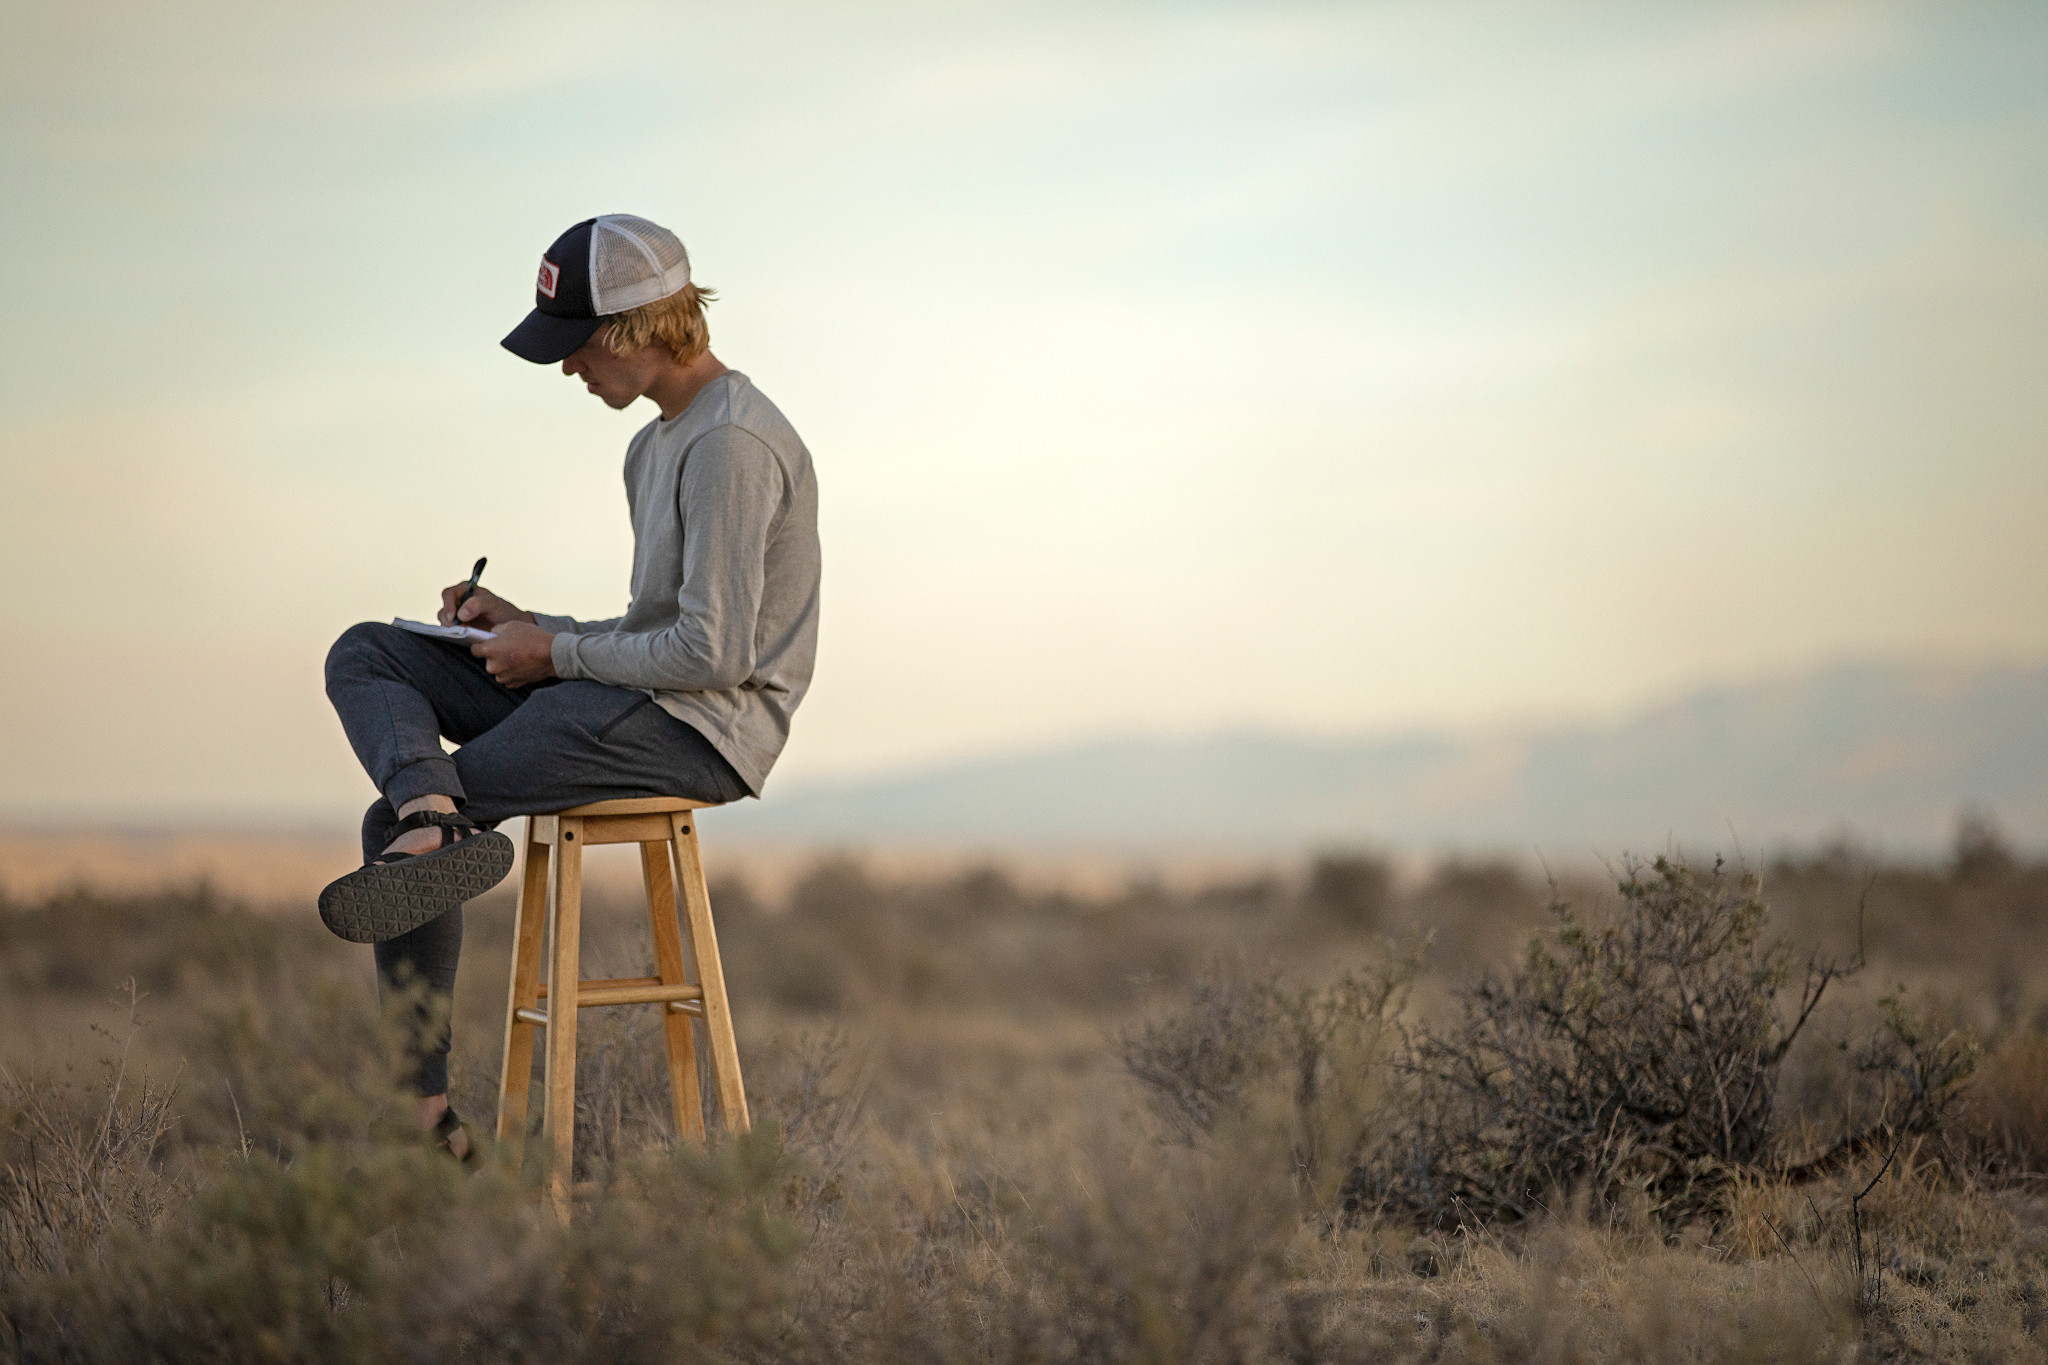 Student writes in a journal while sitting on a stool in a field